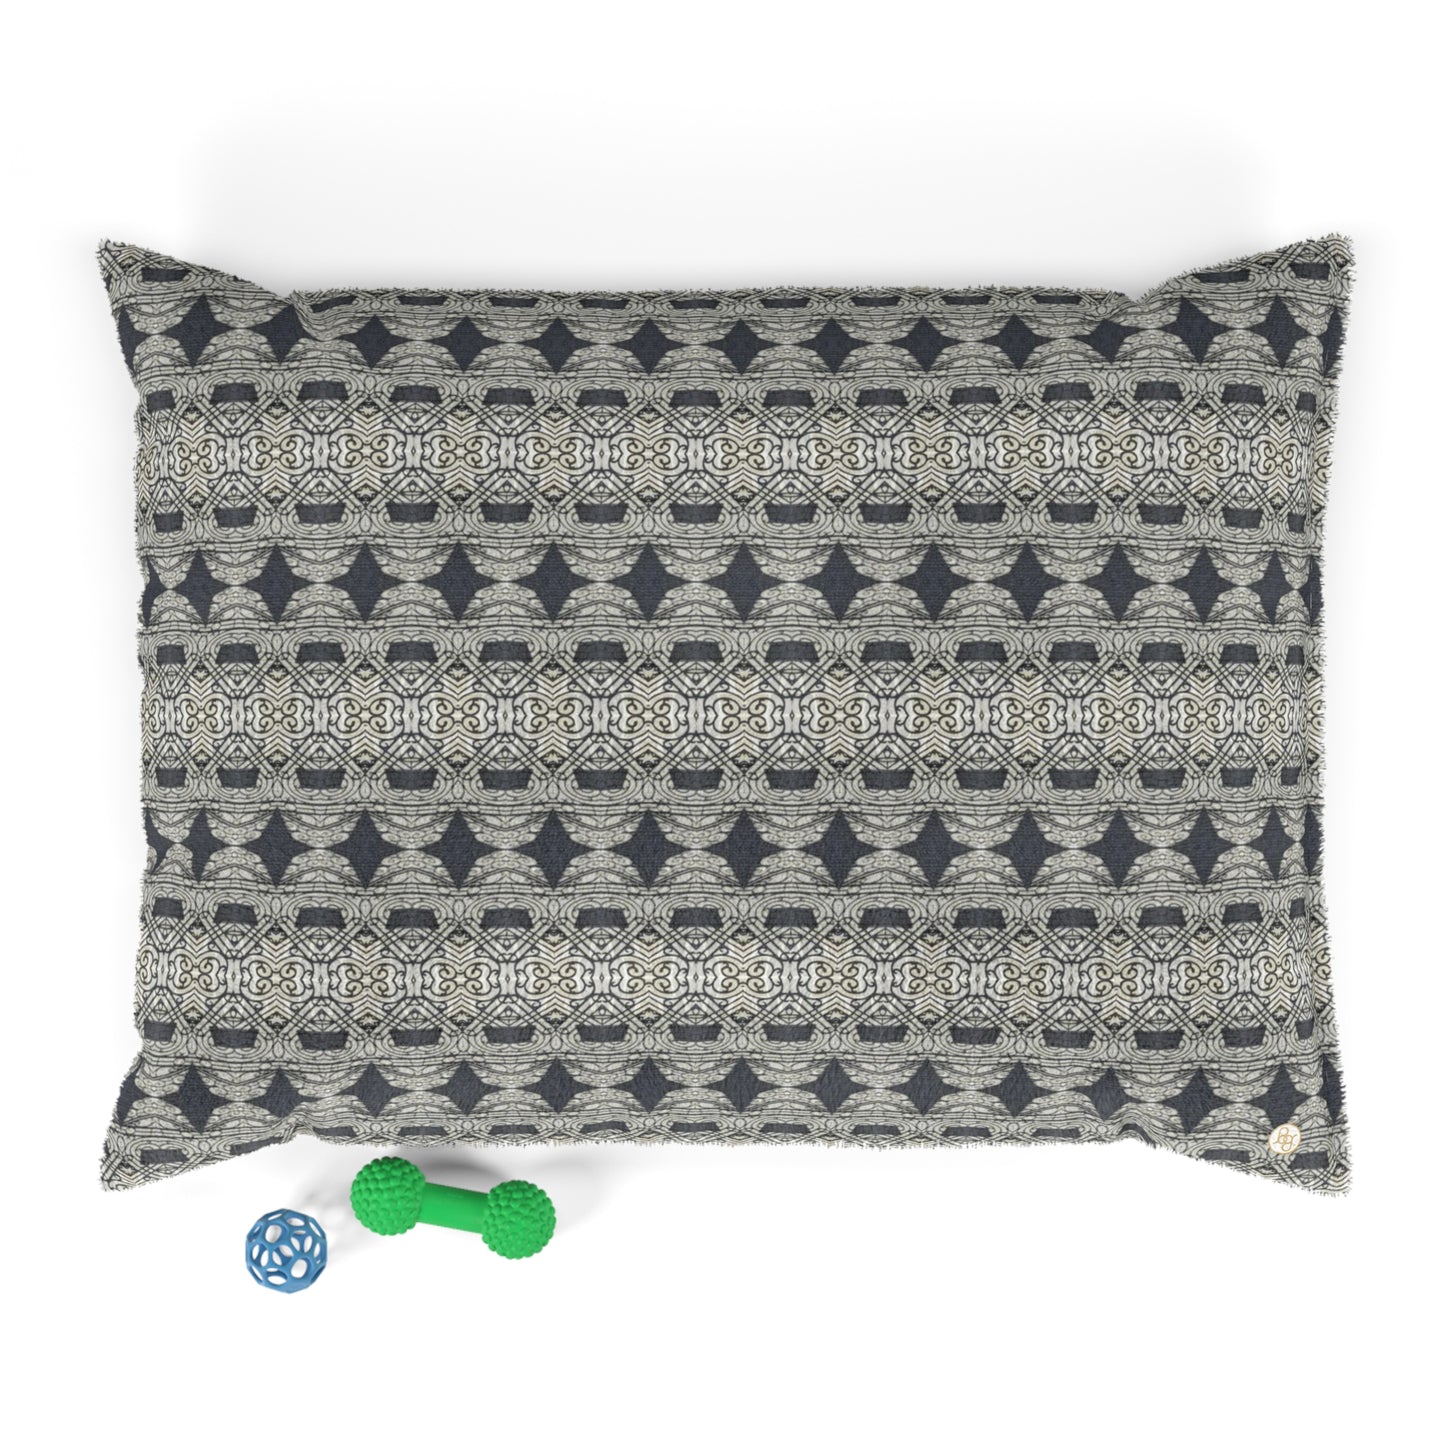 Fleece dog bed featuring a black and gray abstract pattern